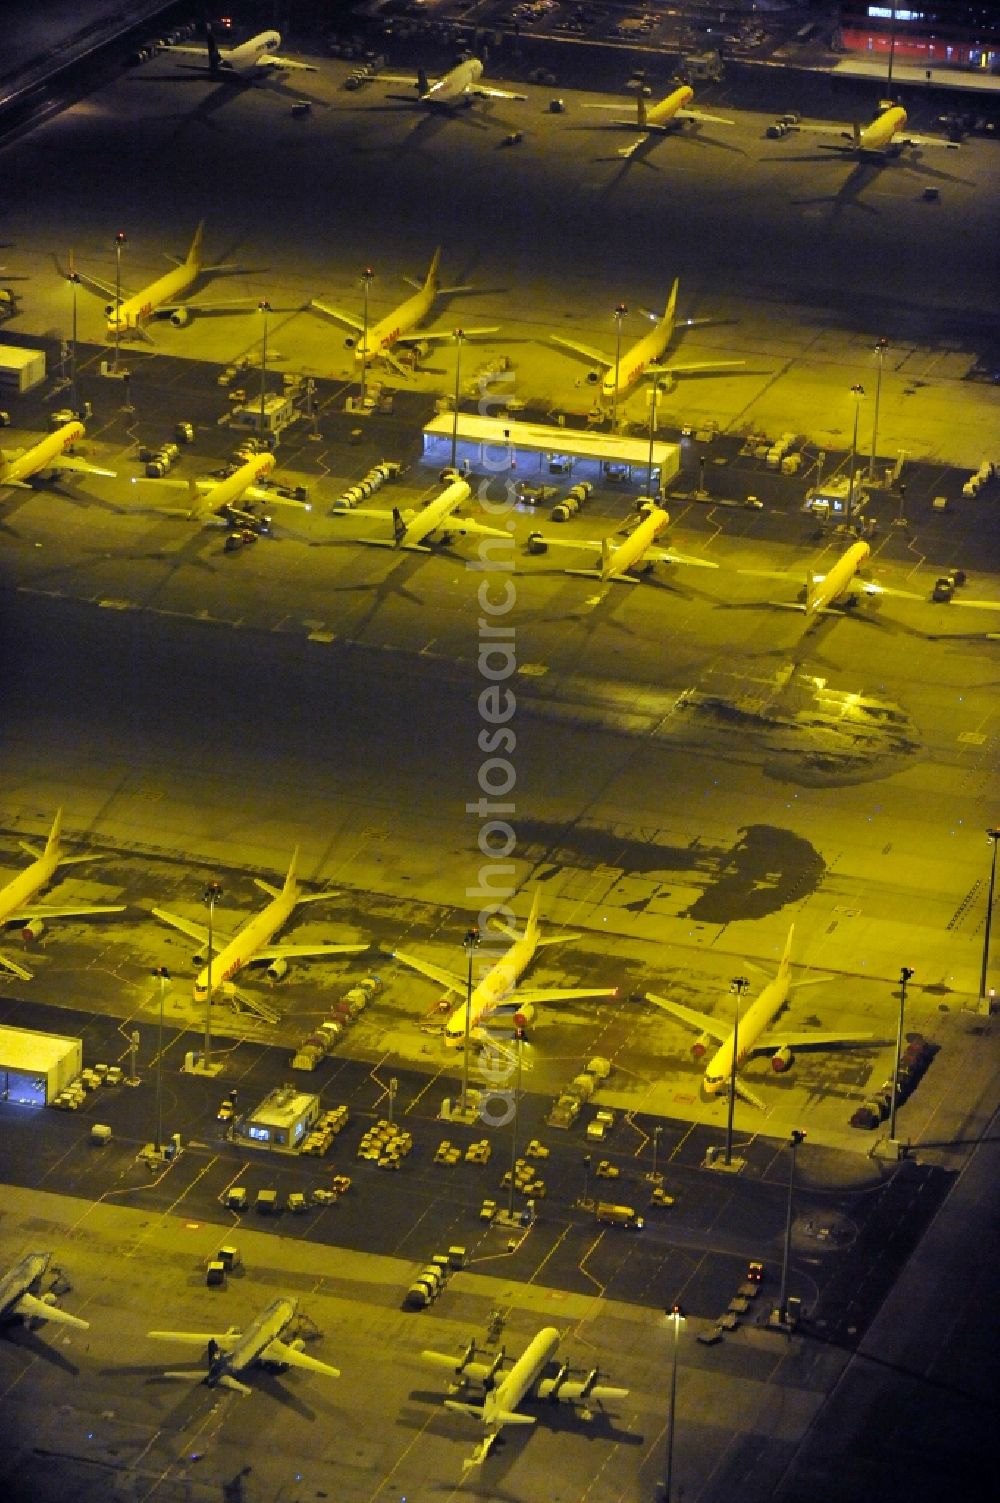 Aerial photograph at night Schkeuditz - Night lighting check-in buildings and cargo terminals on the grounds of the airport on DHL Hub in Schkeuditz in the state Saxony, Germany